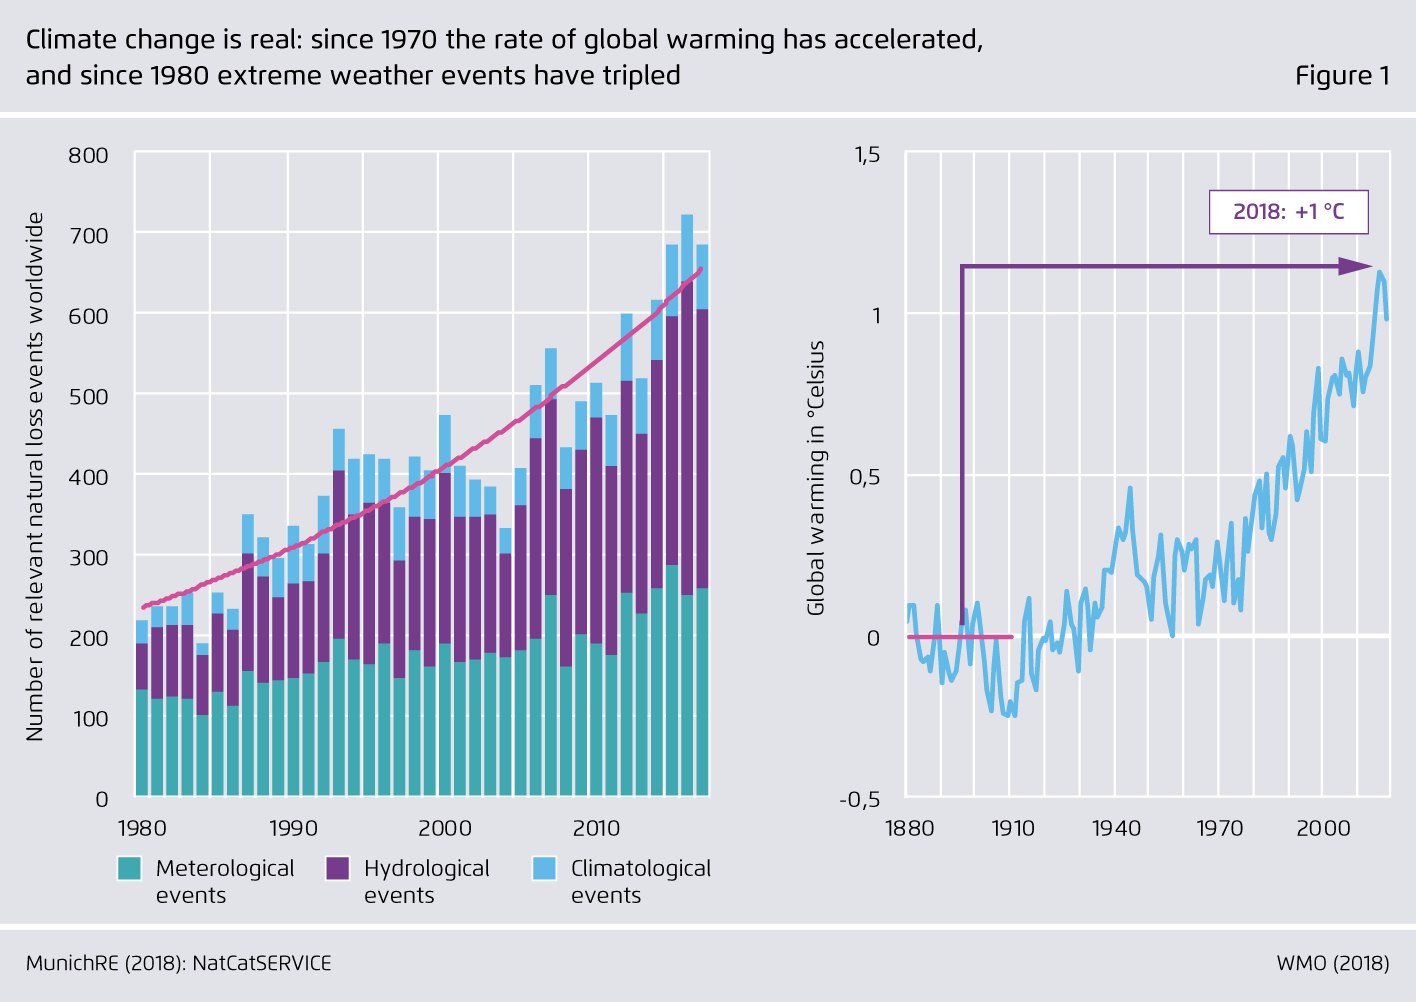 Preview for Climate change is real: since 1970 the rate of global warming has accelerated, and since 1980 extreme weather events have tripled